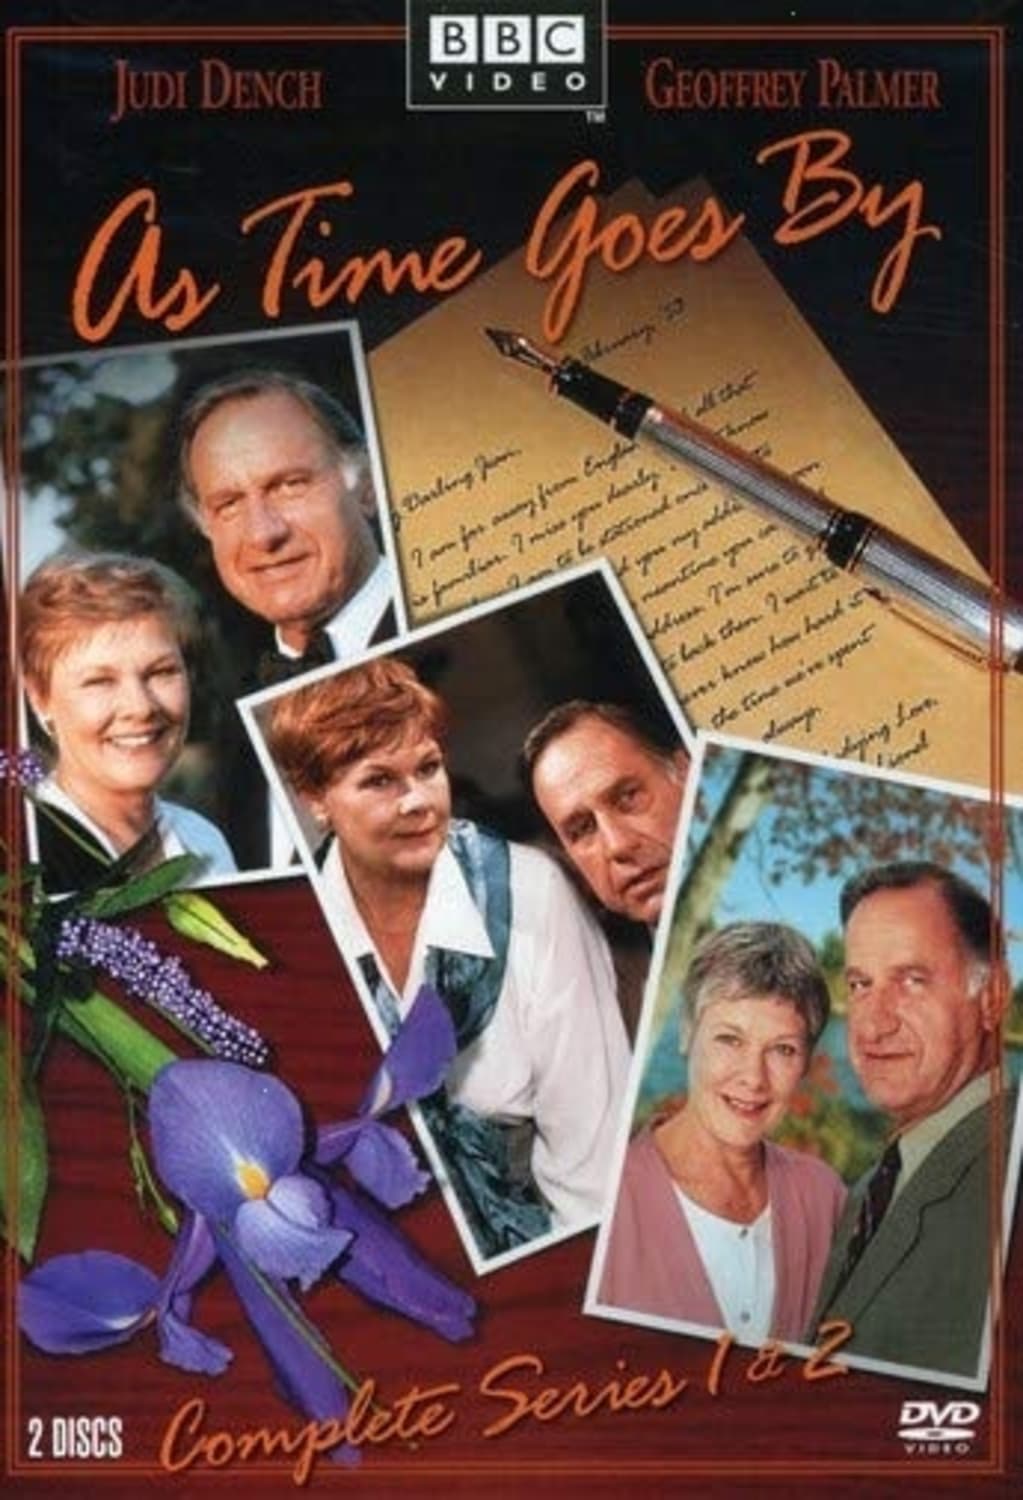 As Time Goes By: Complete Series 1 & 2 (DVD) on MovieShack